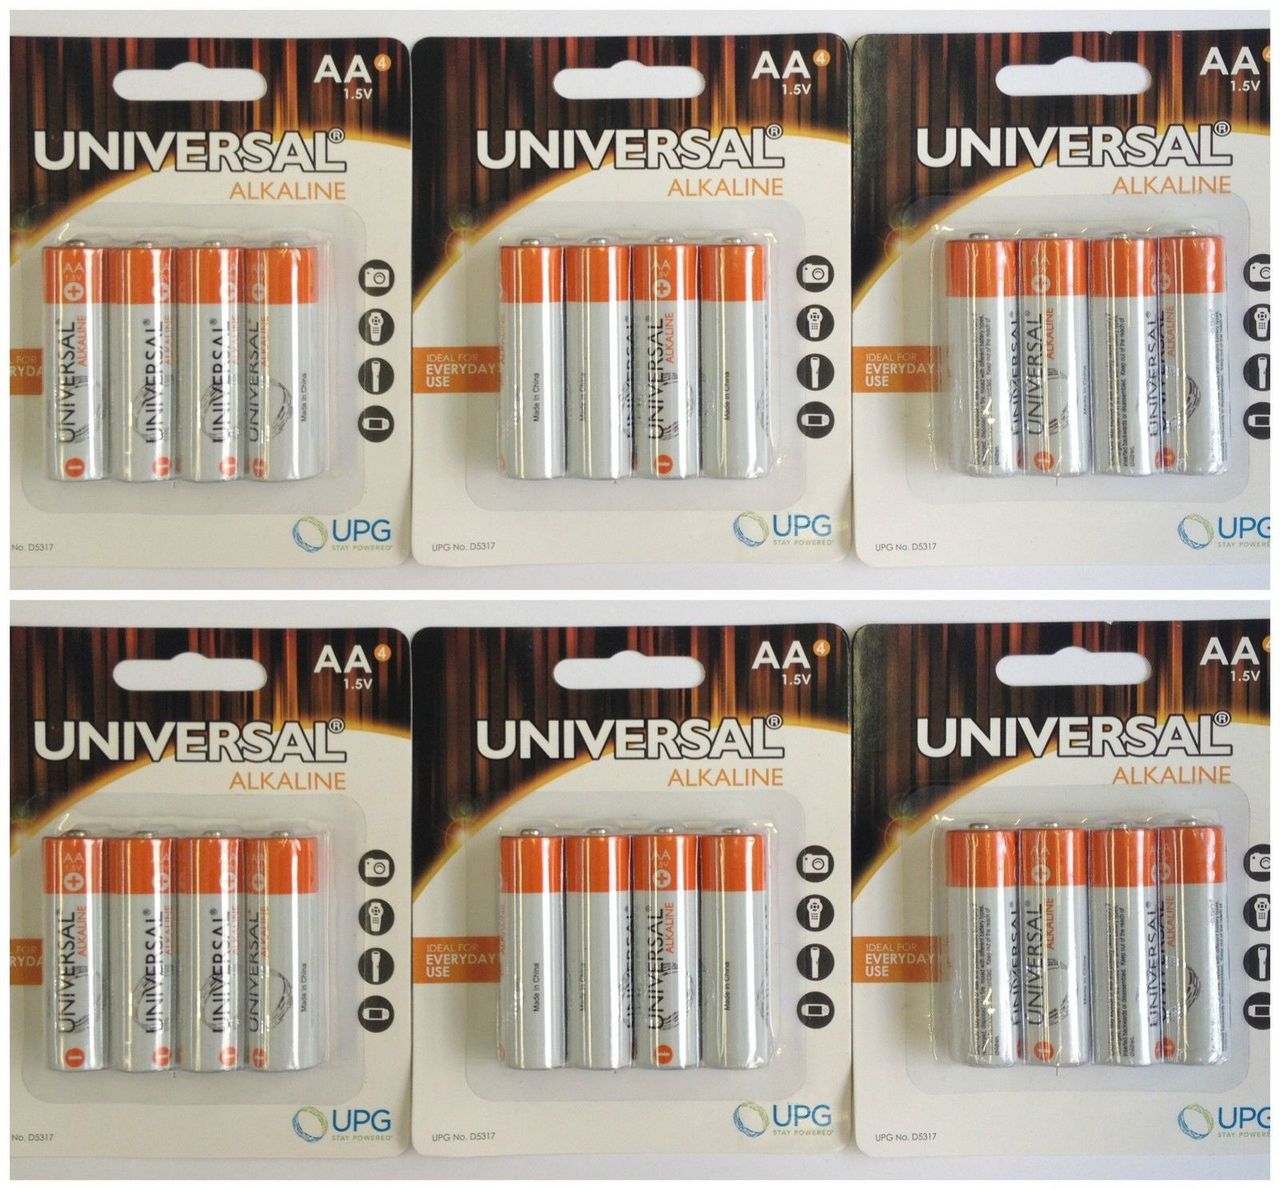 100 PACK OF UNIVERSAL AA ALKALINE BATTERIES IN RETAIL PACKAGING + FREE SHIPPING